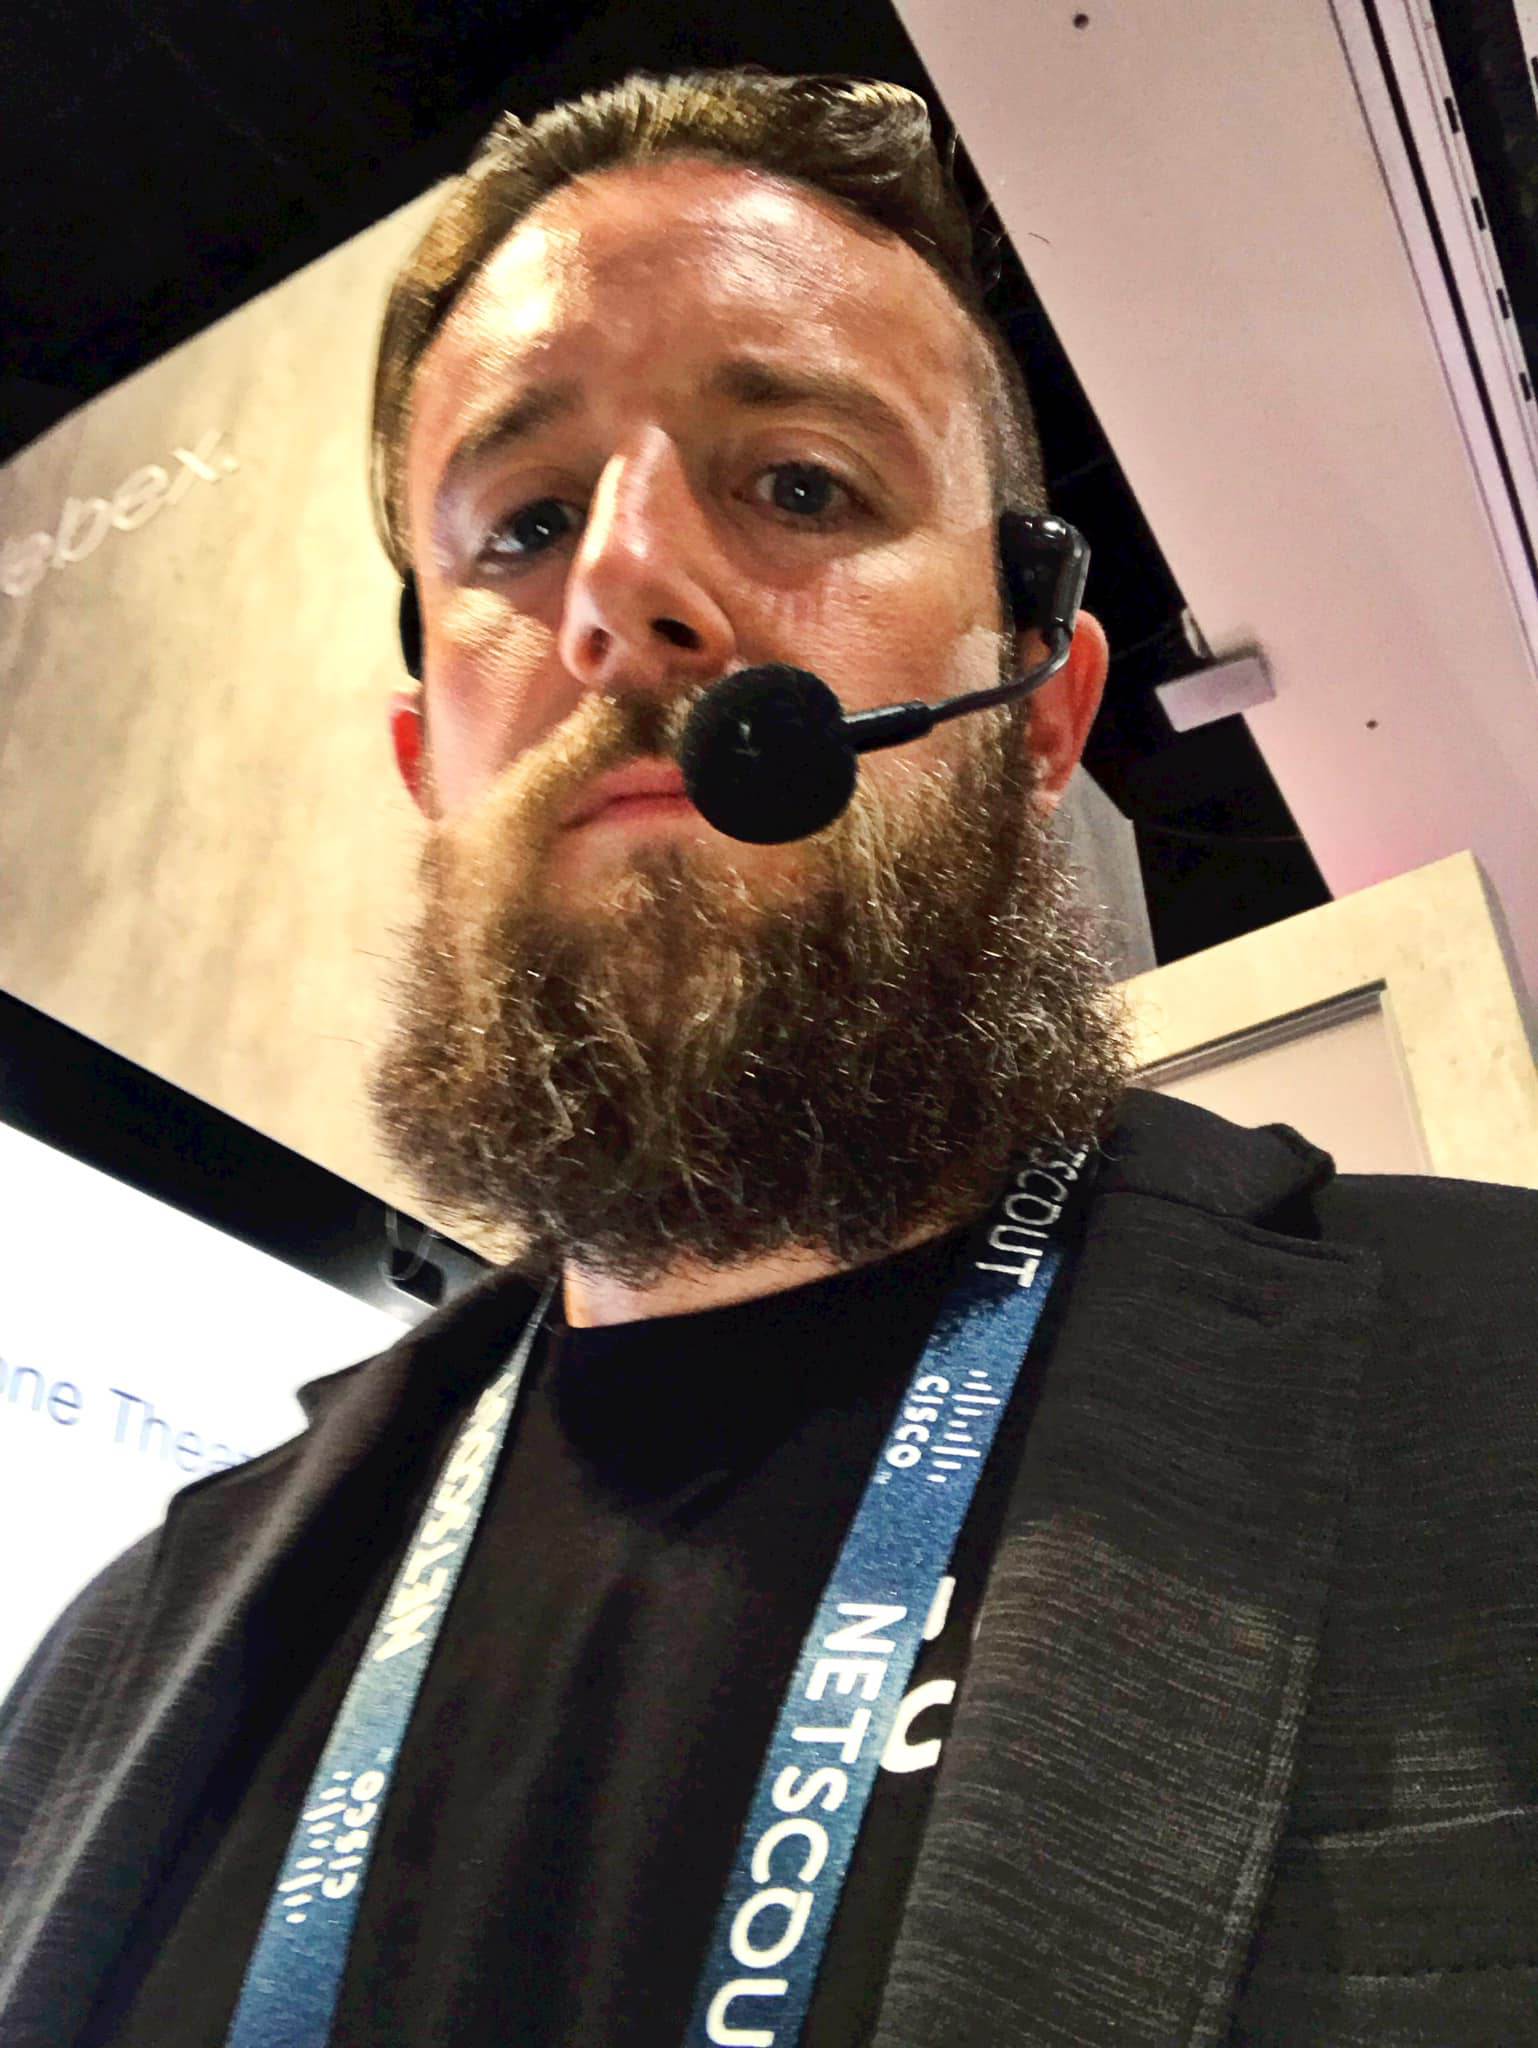 Chris presents again at Cisco Live US but this time more himself with a full beard, t-shirt, and jacket.